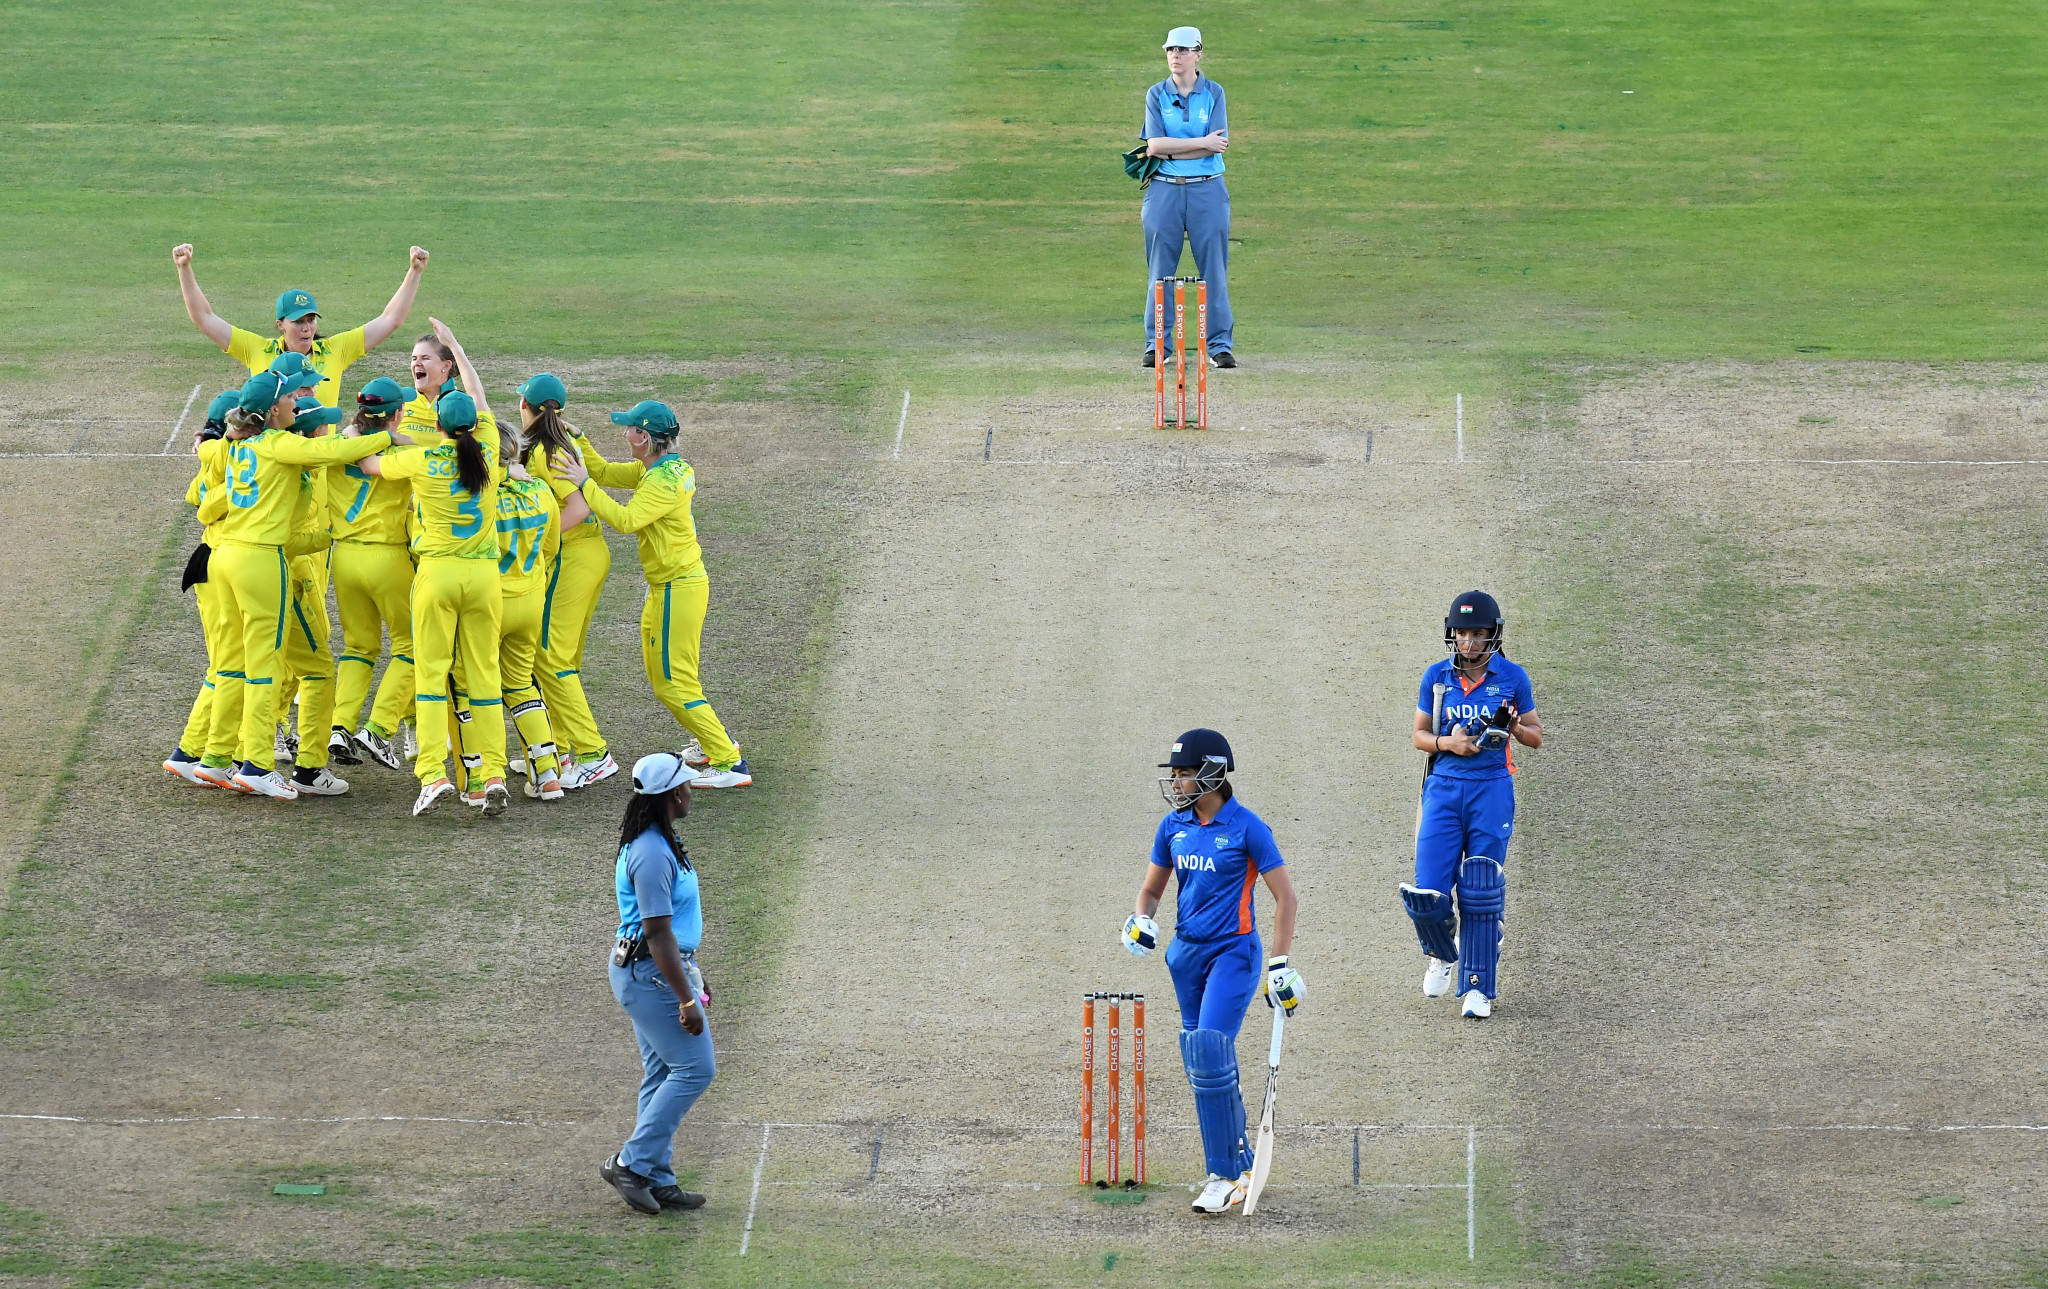 Australia's Commonwealth gold came in a year when they also won the ICC Women's World Cup and retained the Women's Ashes ©Getty Images